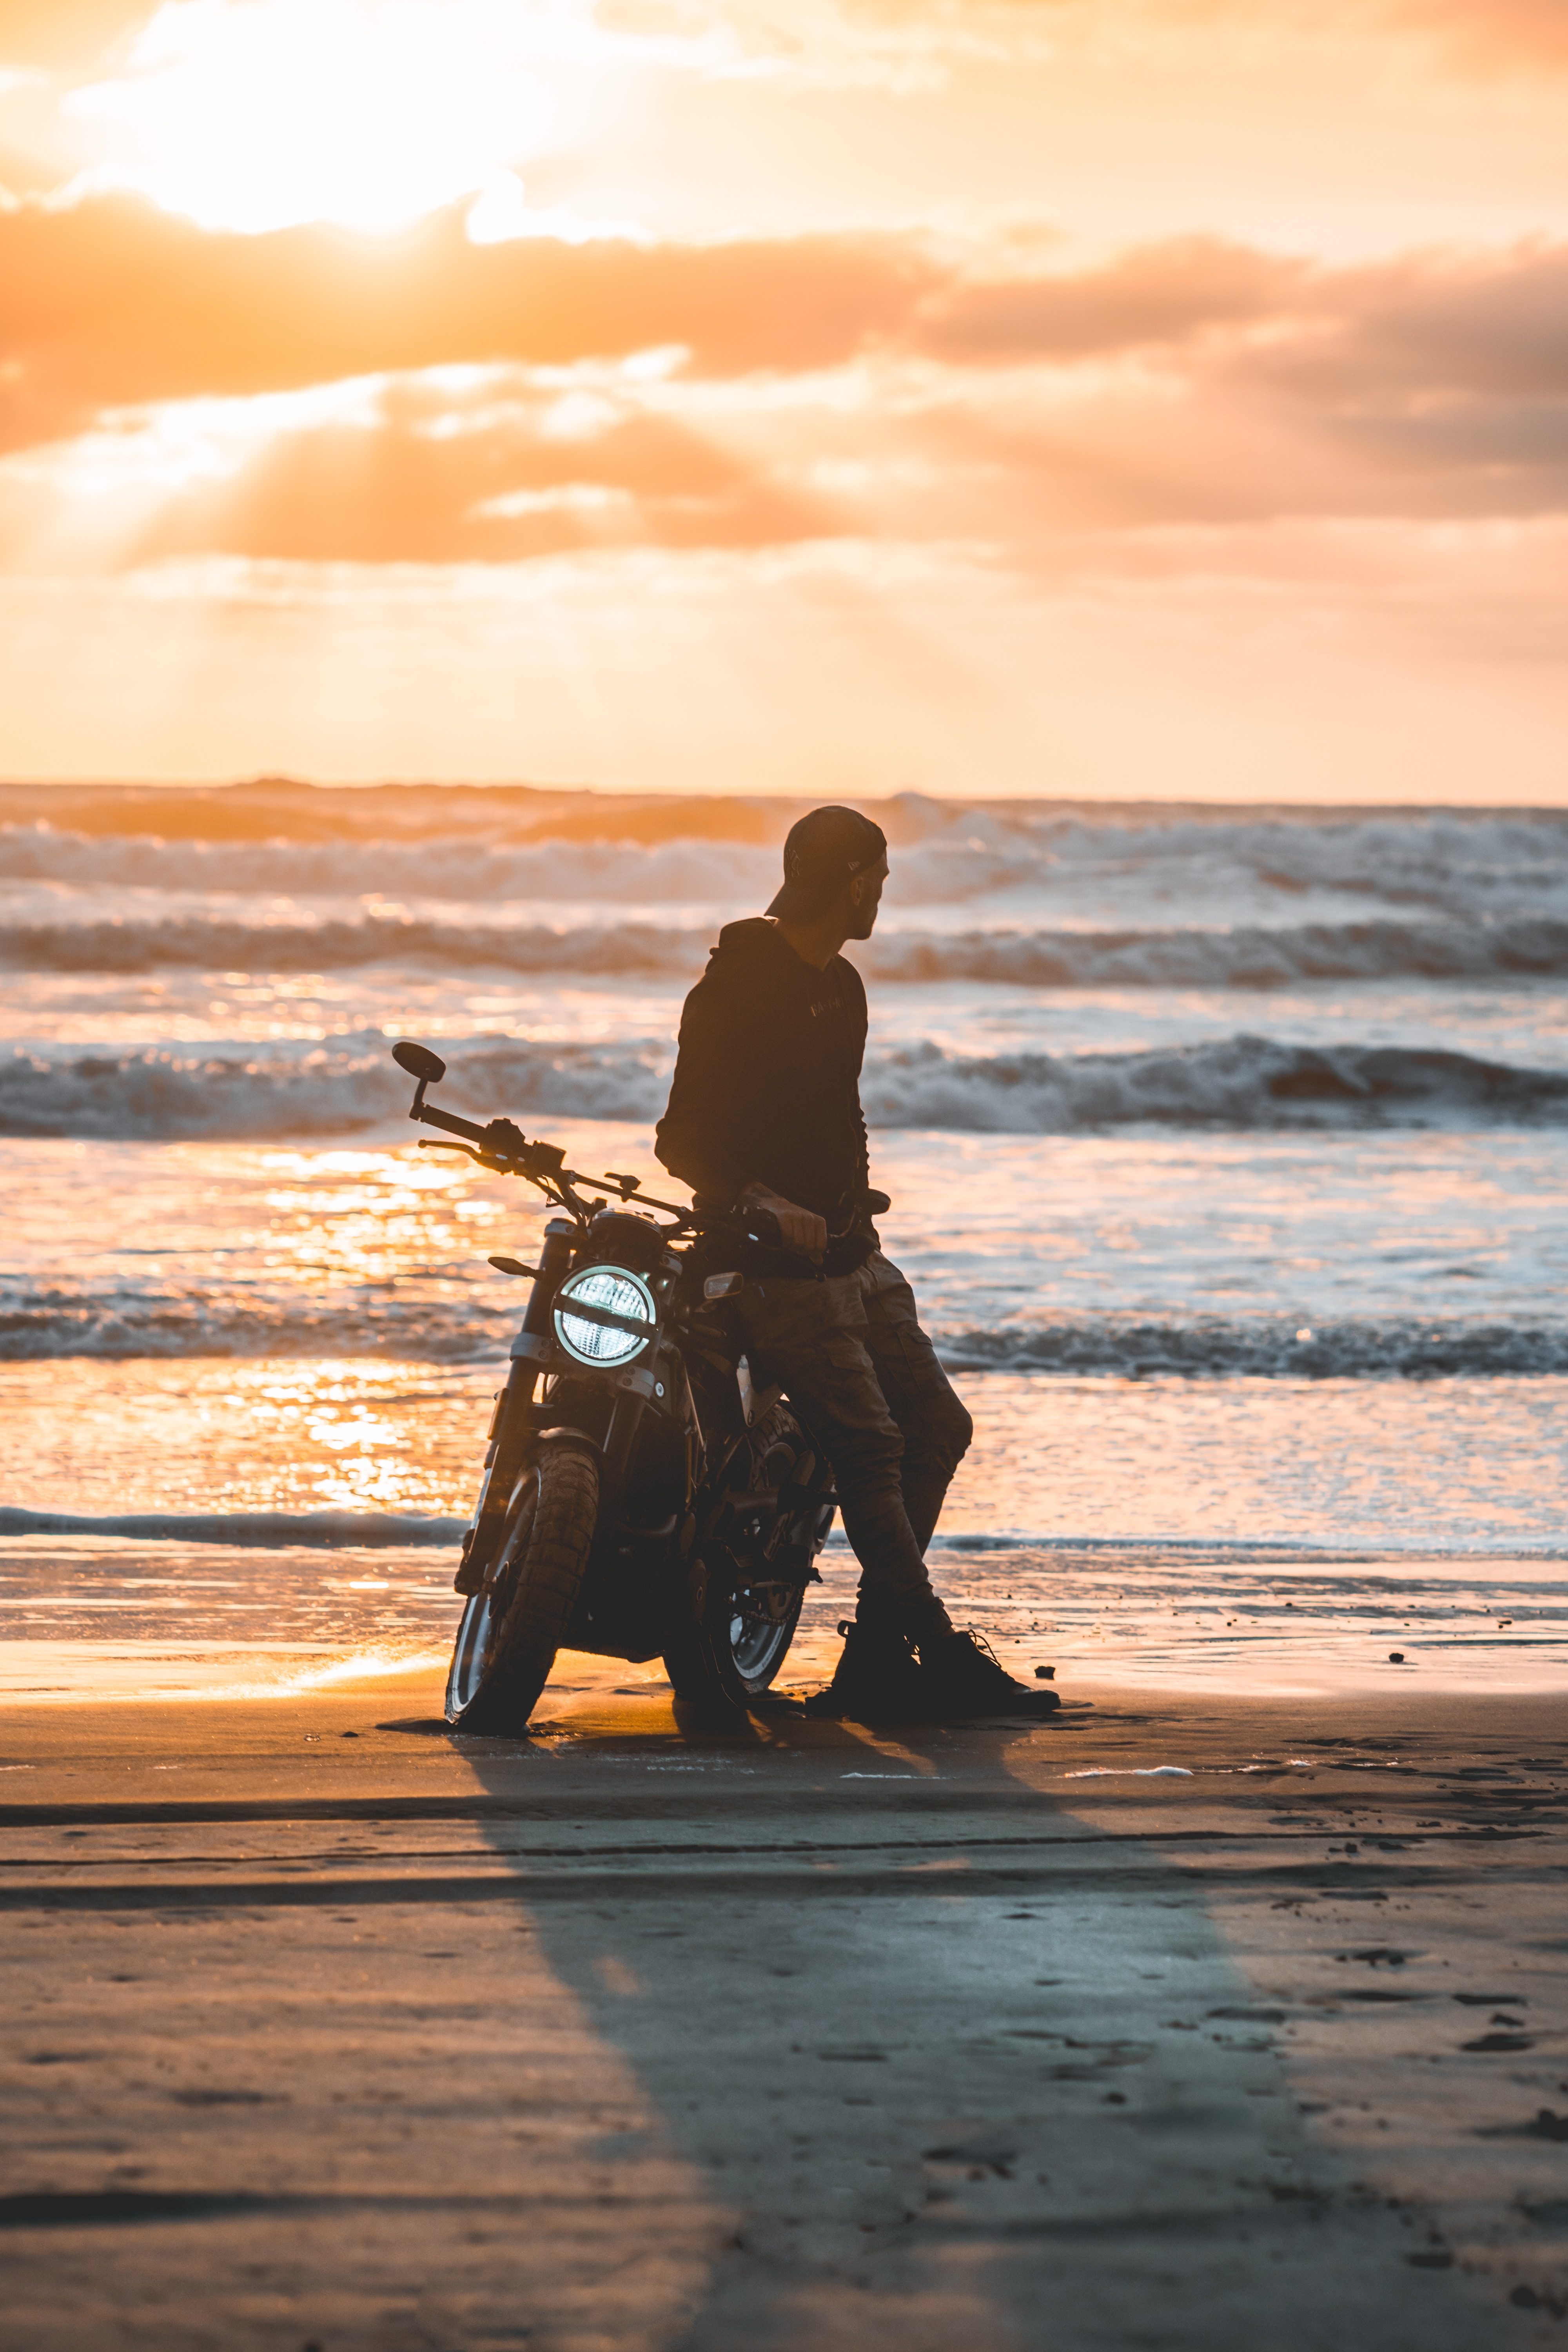 motorcycle, motorcycles, motorcyclist, sunset, silhouette, loneliness